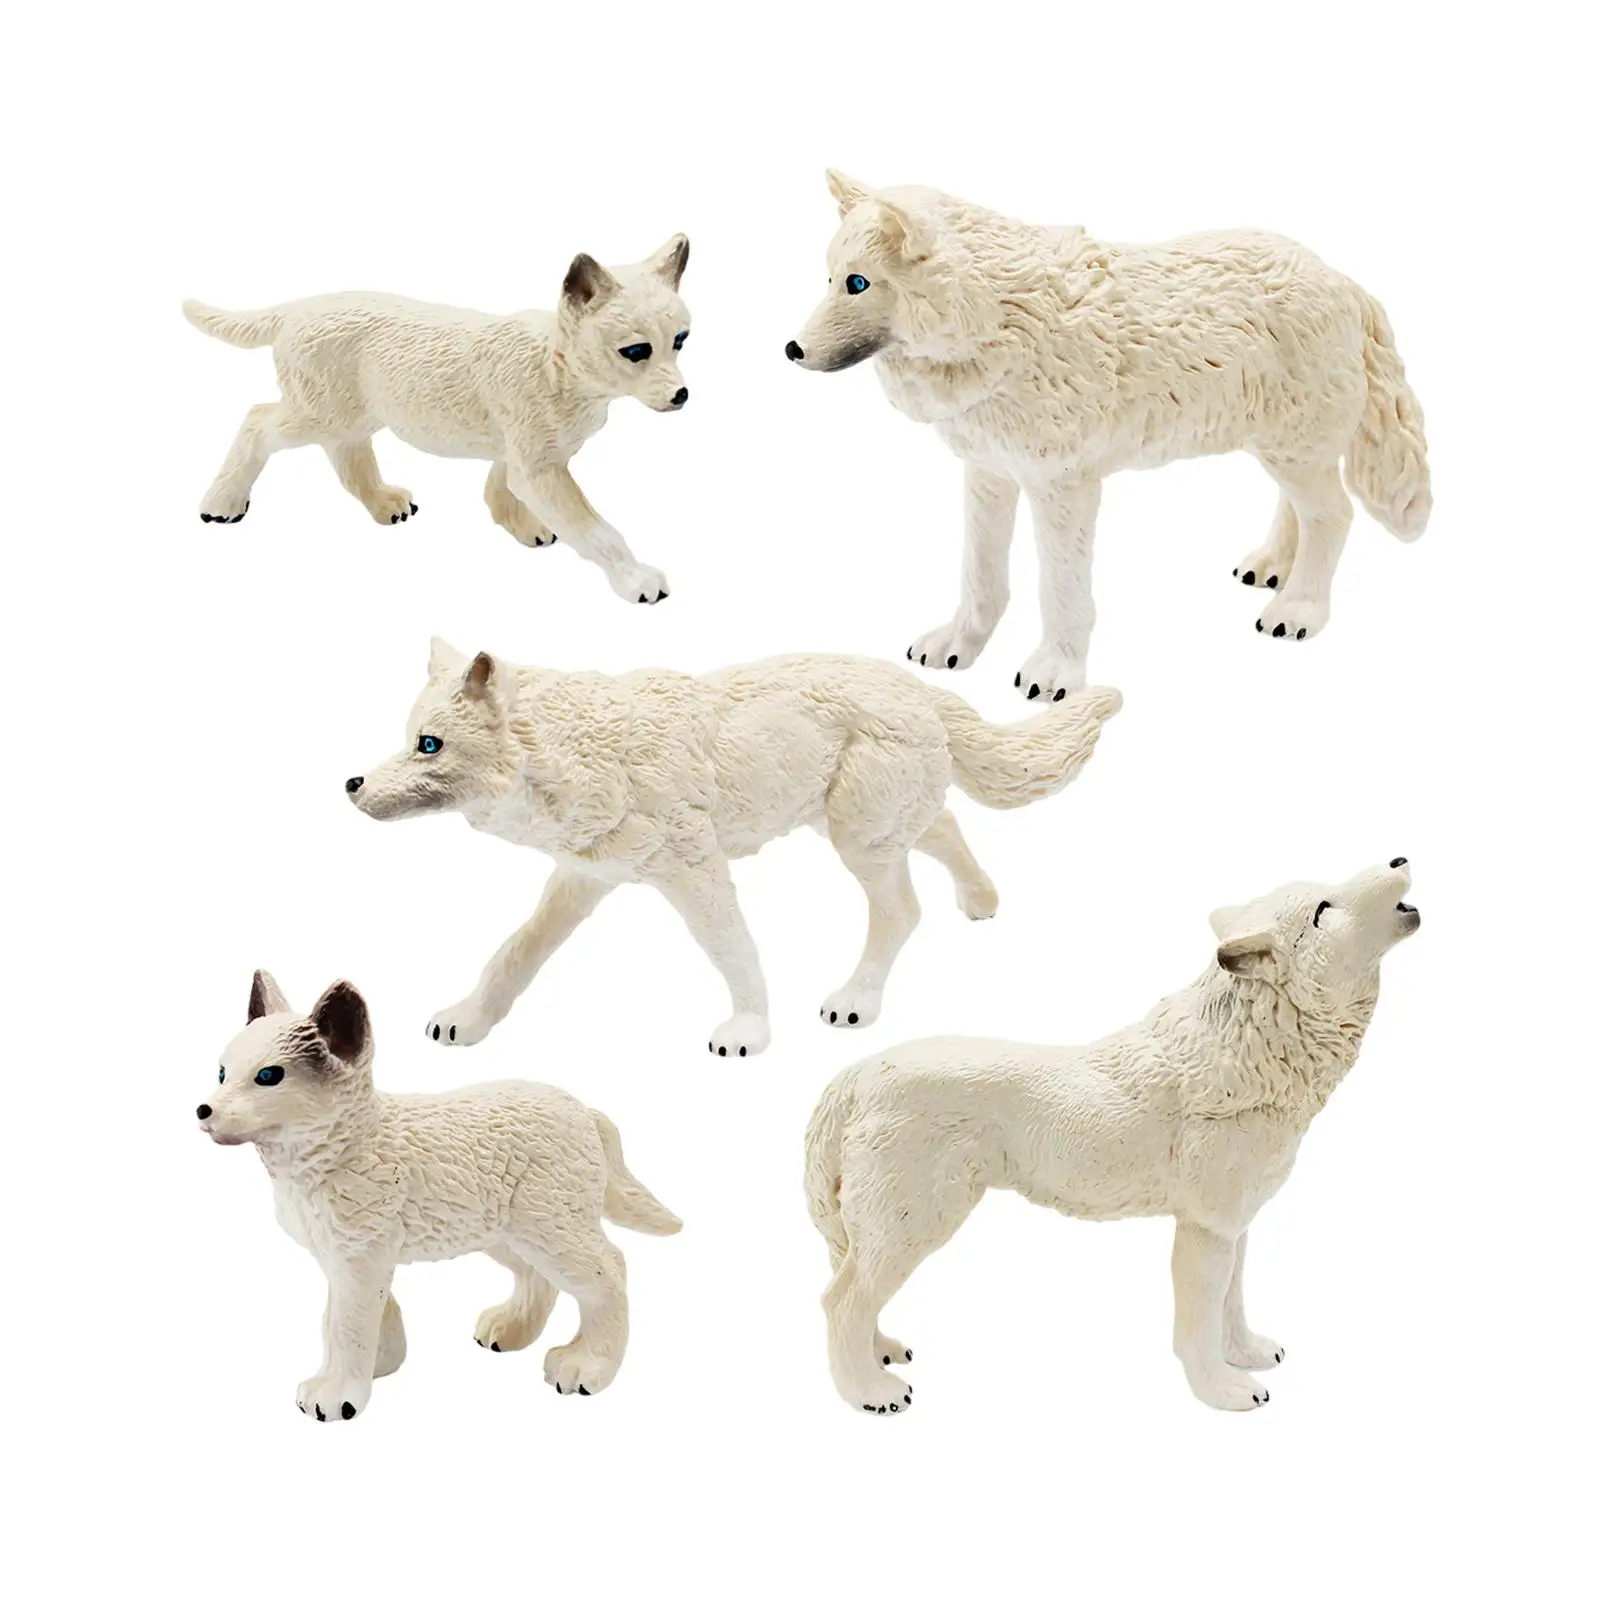 5 Pieces Wolf Toy Figurines for Educational Toys Cake Topper Desktop Decor